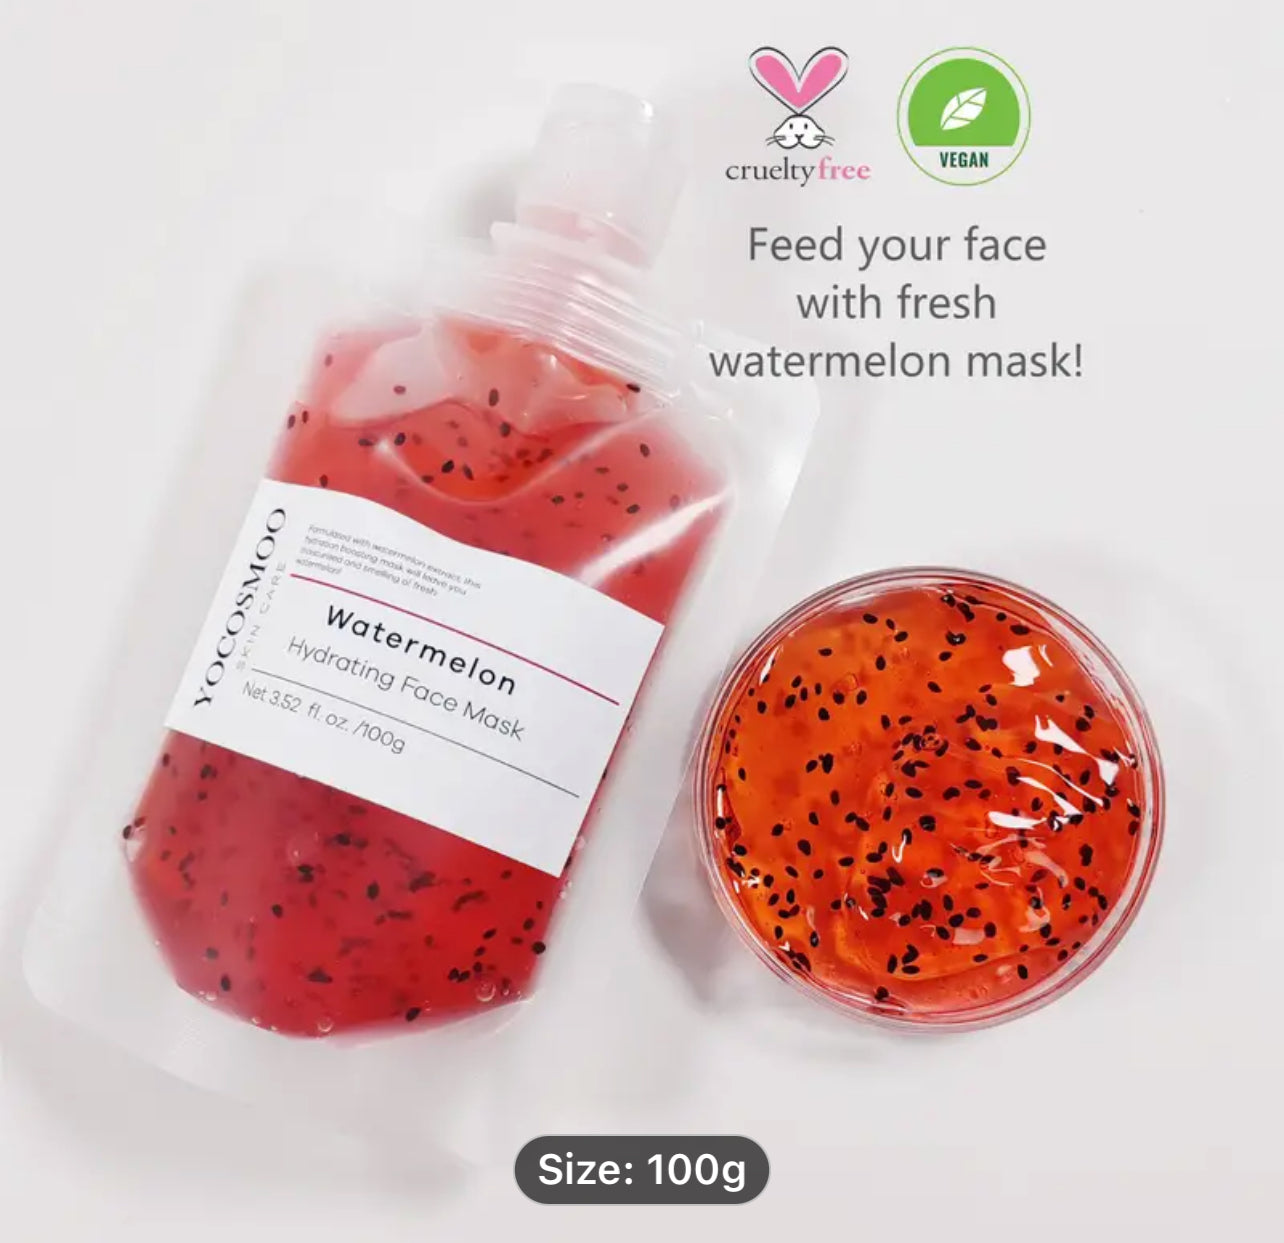 Watermelon Hydrating Face Mask Fresh Watermelon Gel Mask, Deep Moisturizing And Hydrating, Lighten Skin Tone, Prevent Dryness And Cracking